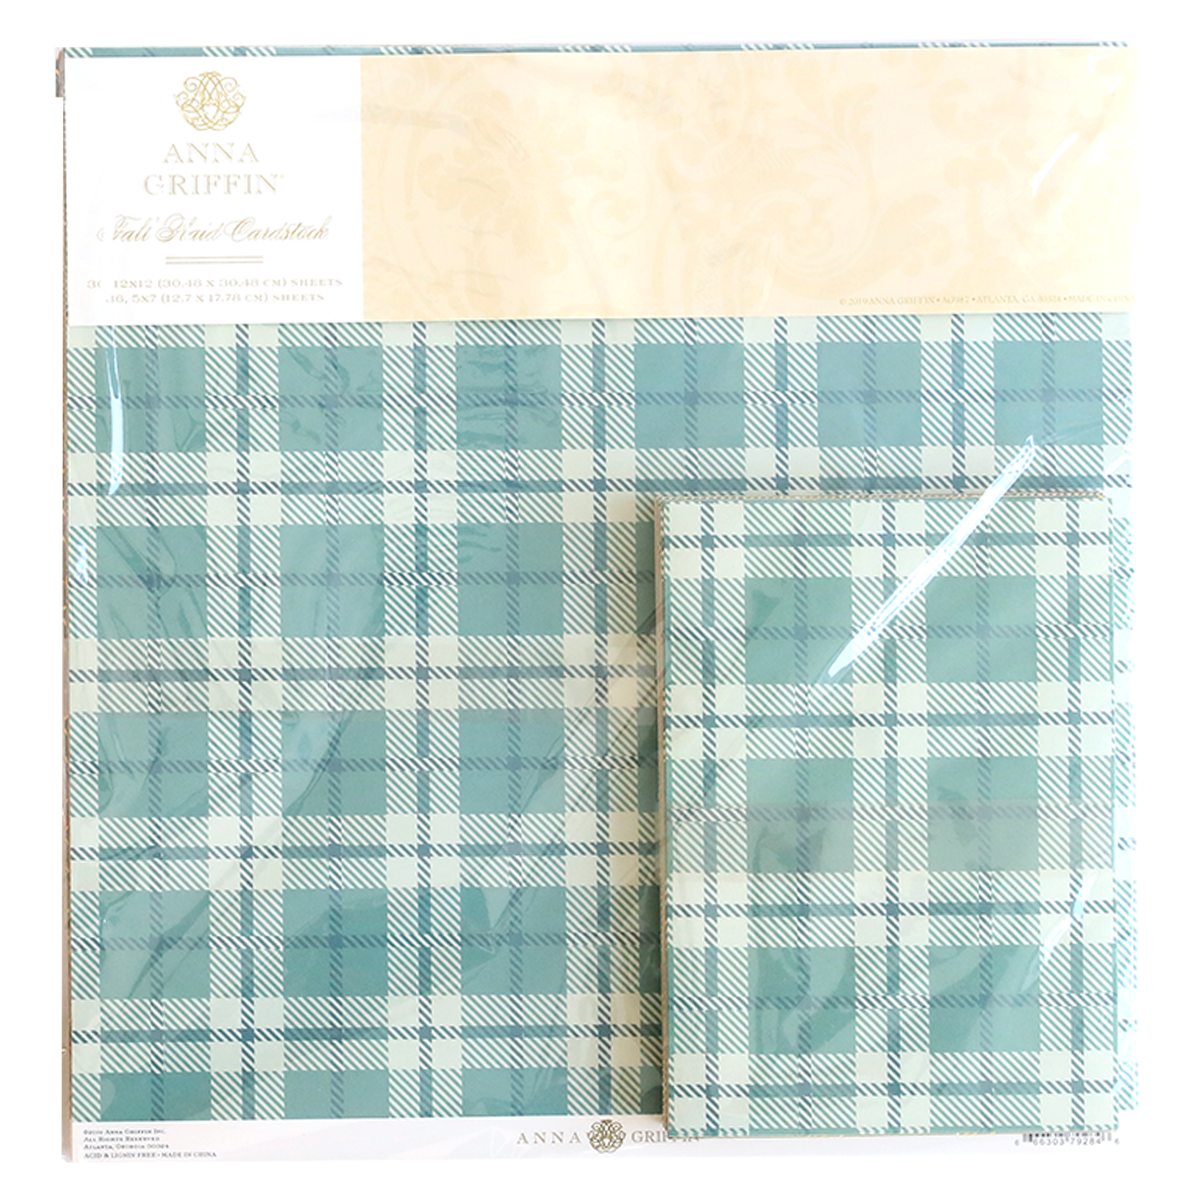 A blue and white Fall Plaid Cardstock pattern in an Anna Griffin package.